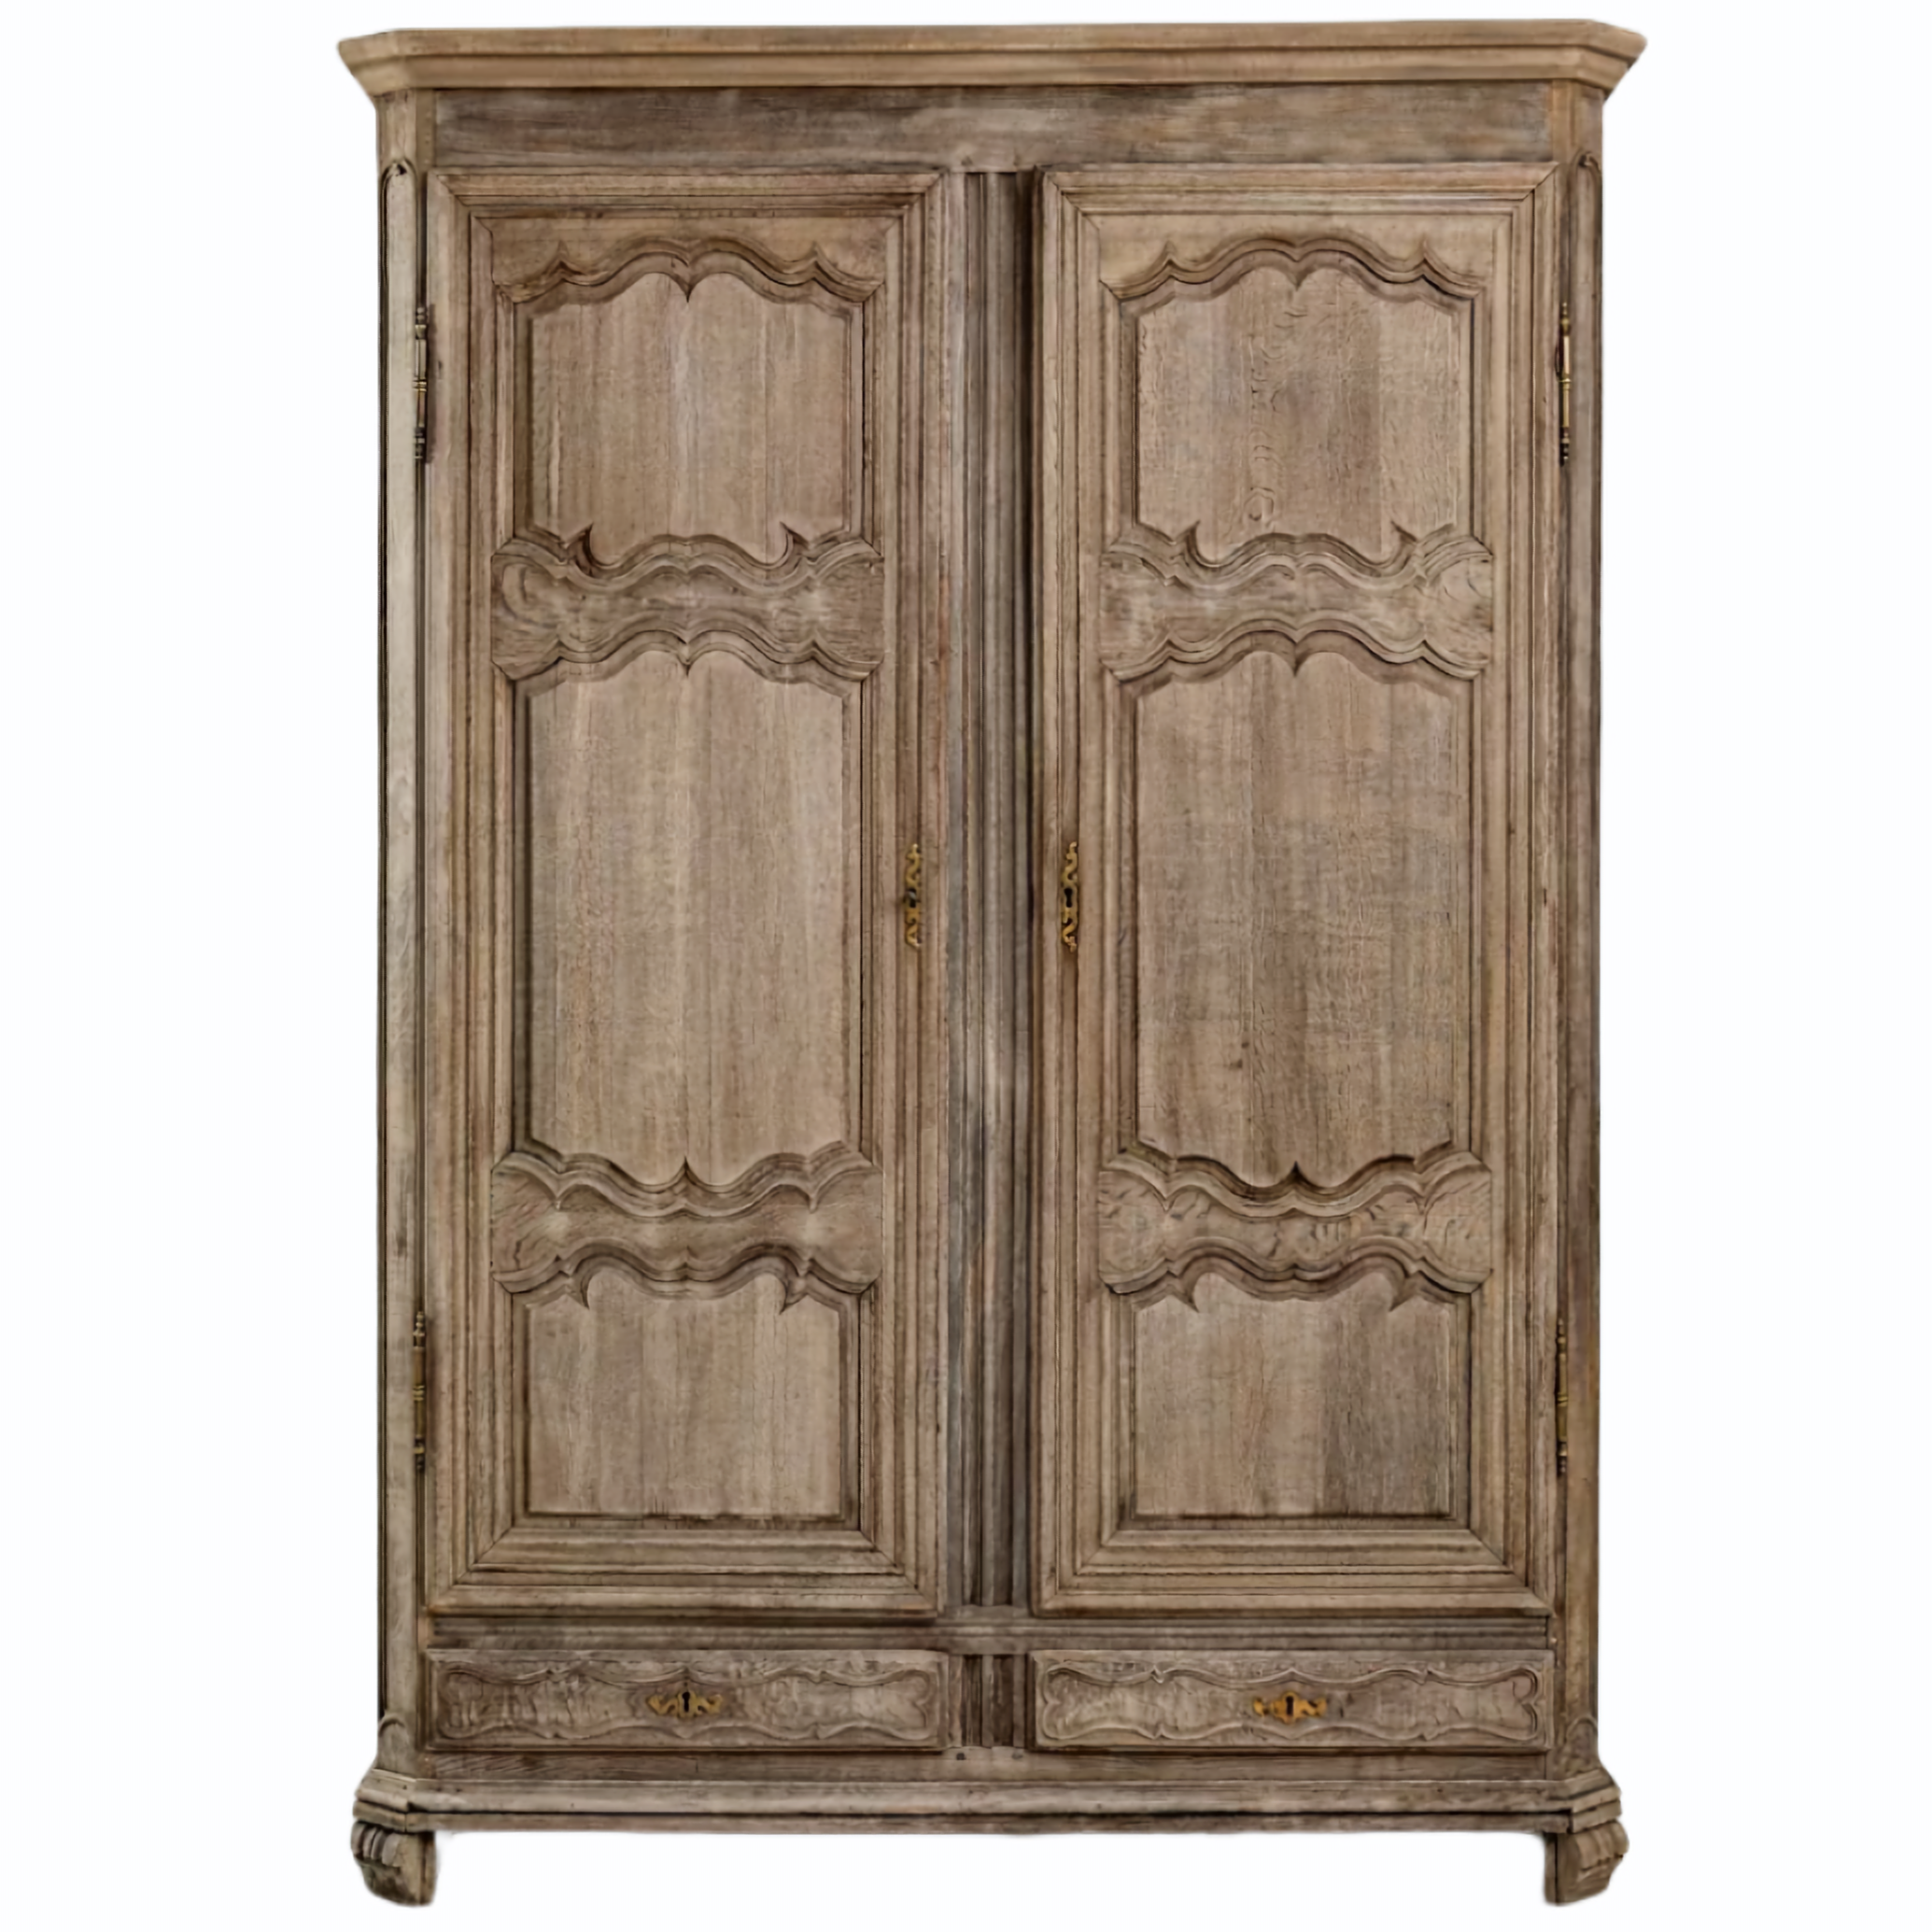 Antique French Country Carved Door Armoire, Circa 1780